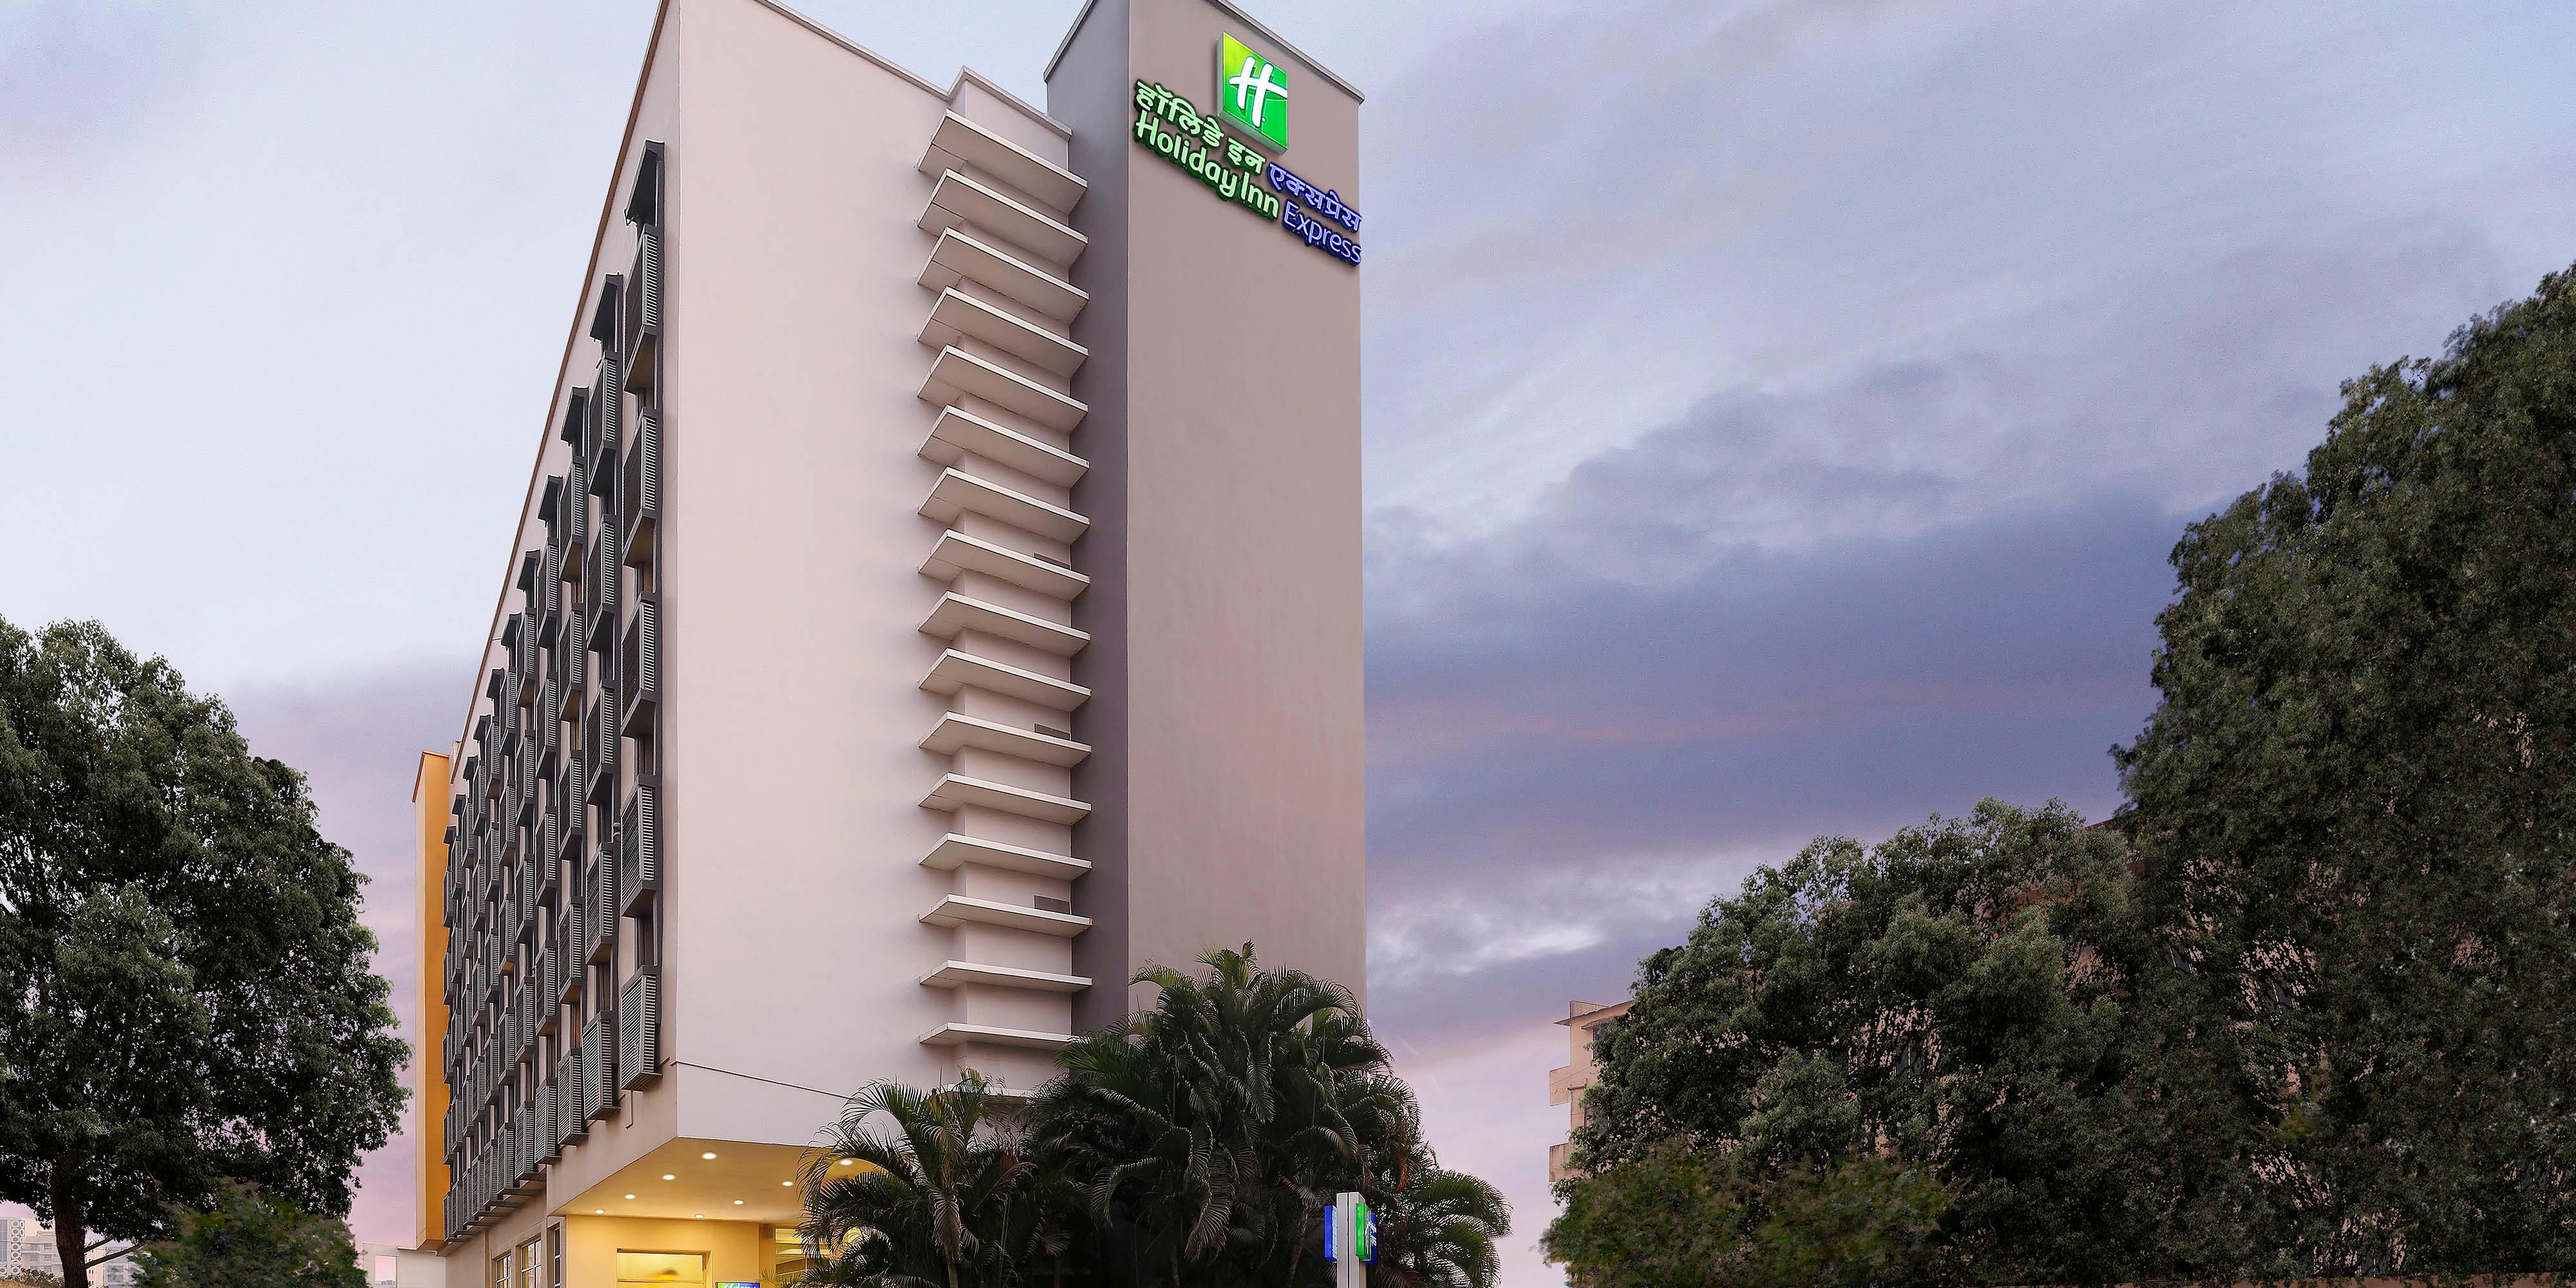 Pune Hotels  Top 3 Hotels in Pune, India by IHG